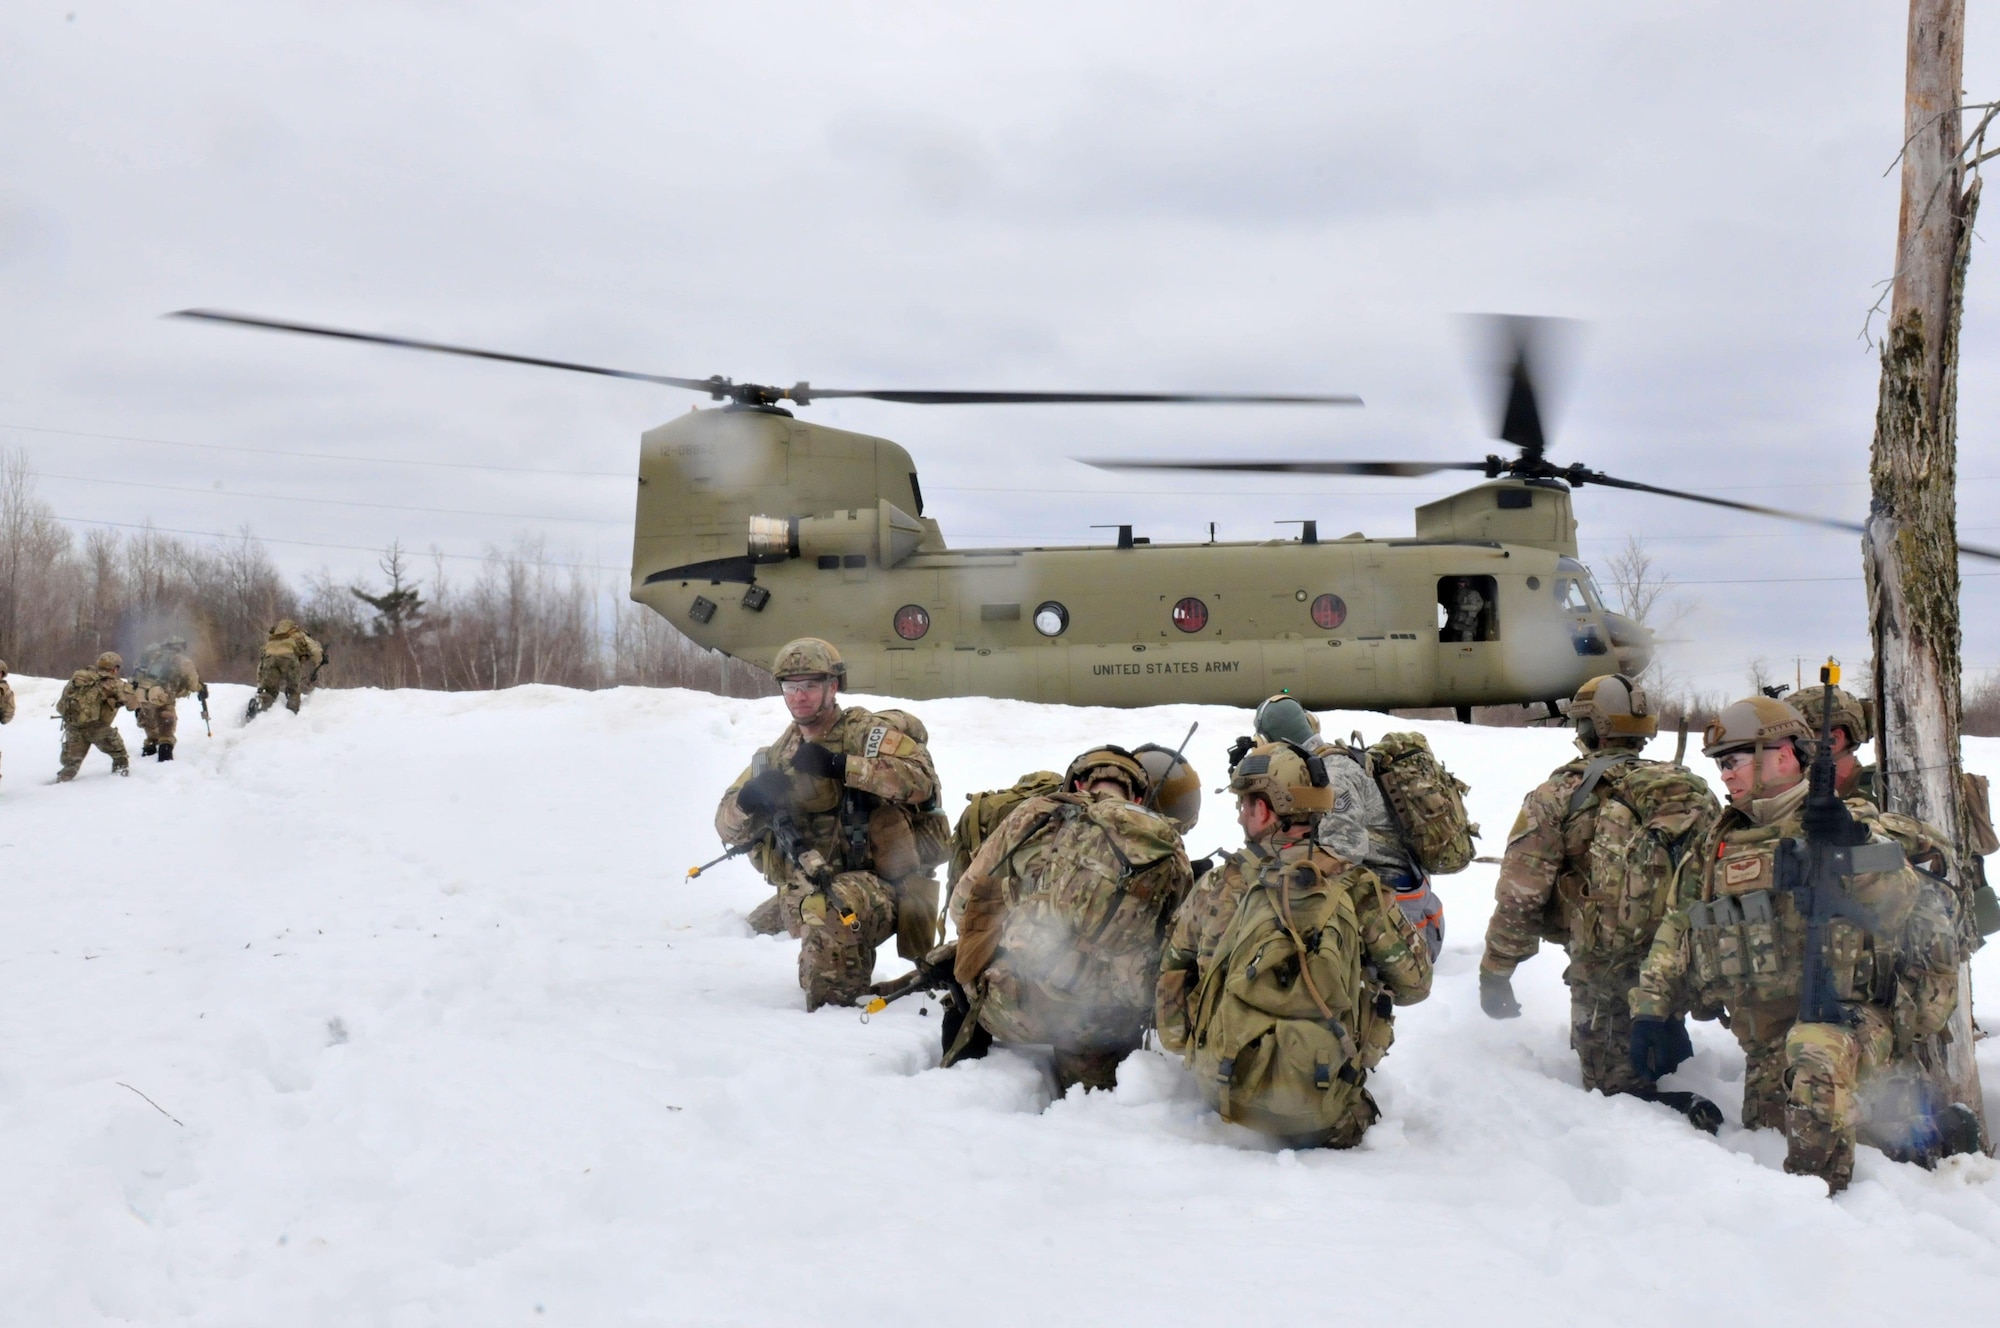 Airmen from the New York Air National Guard's 274th Air Support Operations Squadron wait to board a CH-47 F helicopter from Company B, 2nd Battalion, 126th Aviation of the New York Army National Guard during joint training March 14, 2015, at Fort Drum, N.Y. The two units teamed up to conduct air insertion and tactical training at Fort Drum. (New York Air National Guard photo/Master Sgt. Eric Miller)